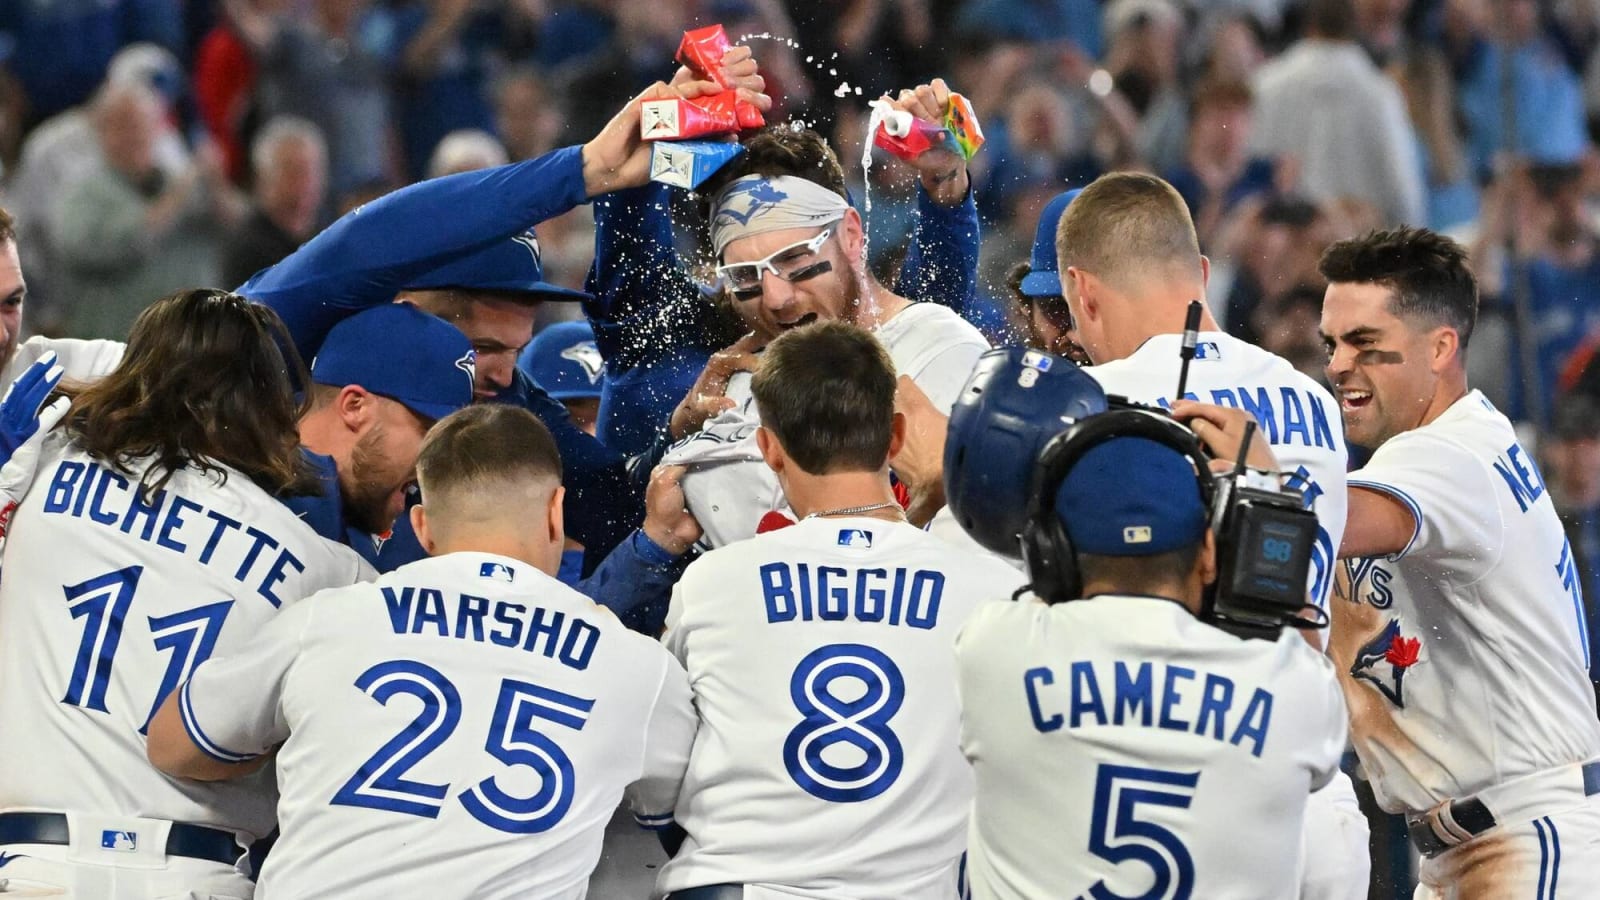 Blue Jays pitch 10 scoreless innings before Danny Jansen walks off the Yankees with a three-run bomb